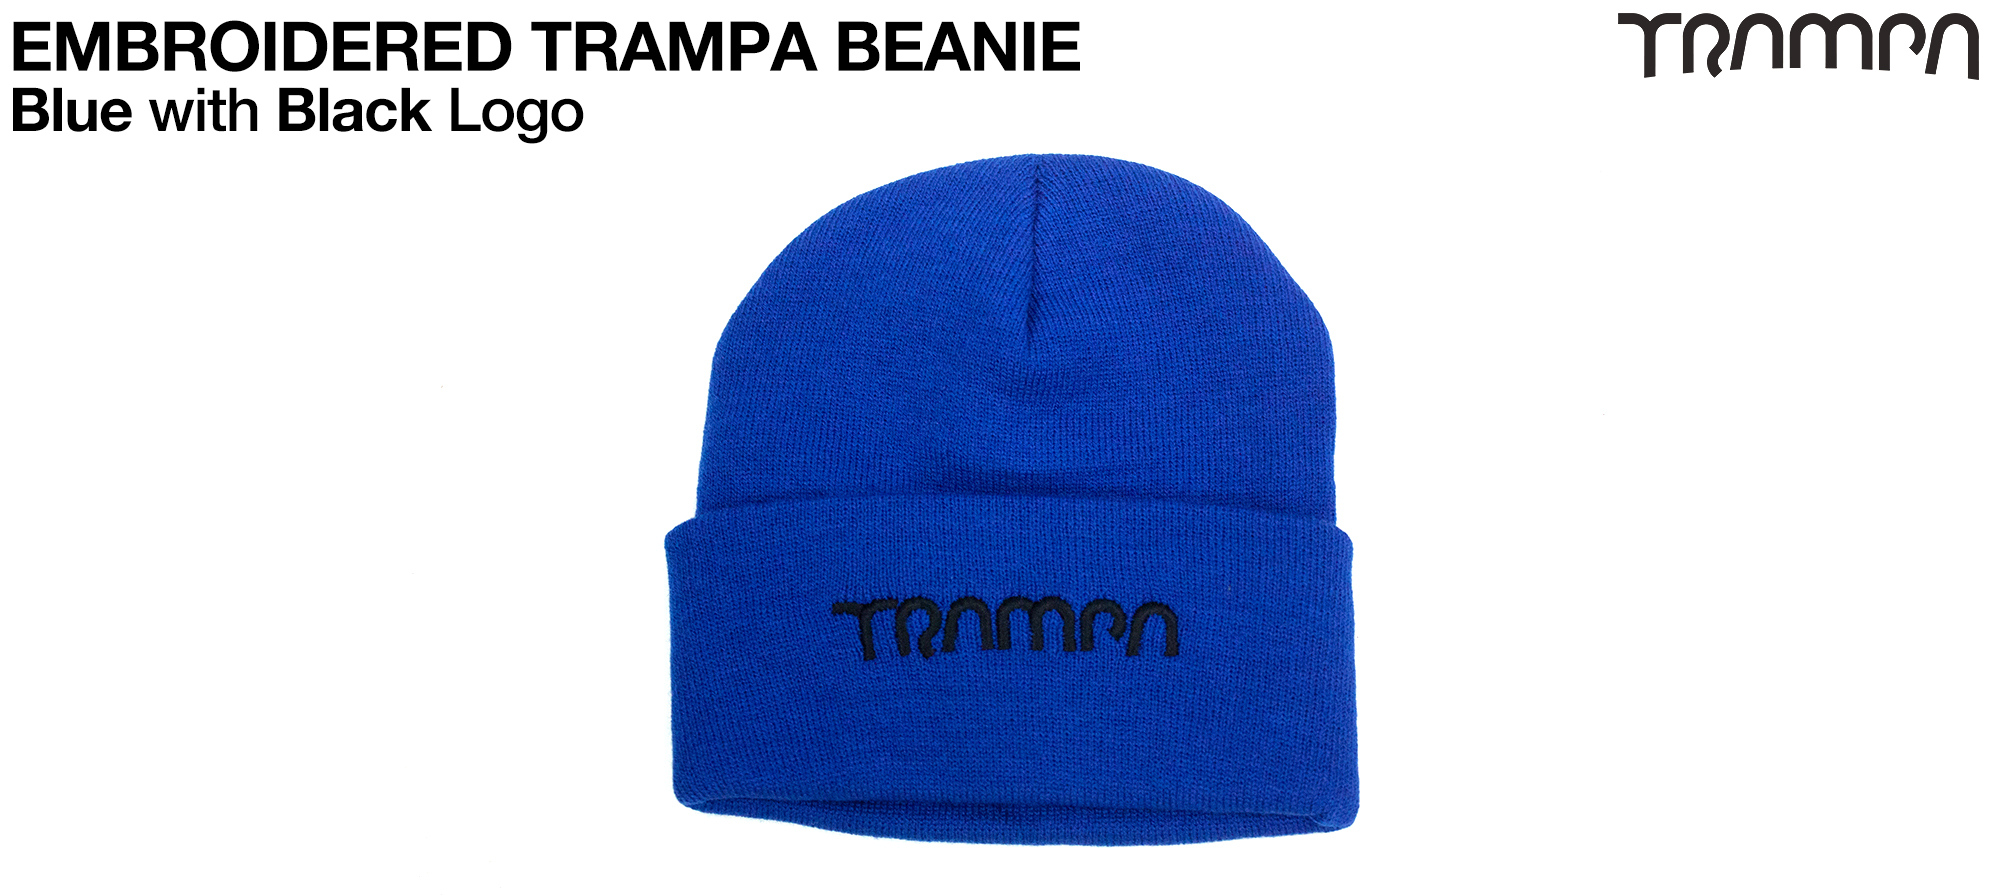 OXFORD BLUE Beanie with BLACK TRAMPA Embroidery - Double thick turn over for extra warmth